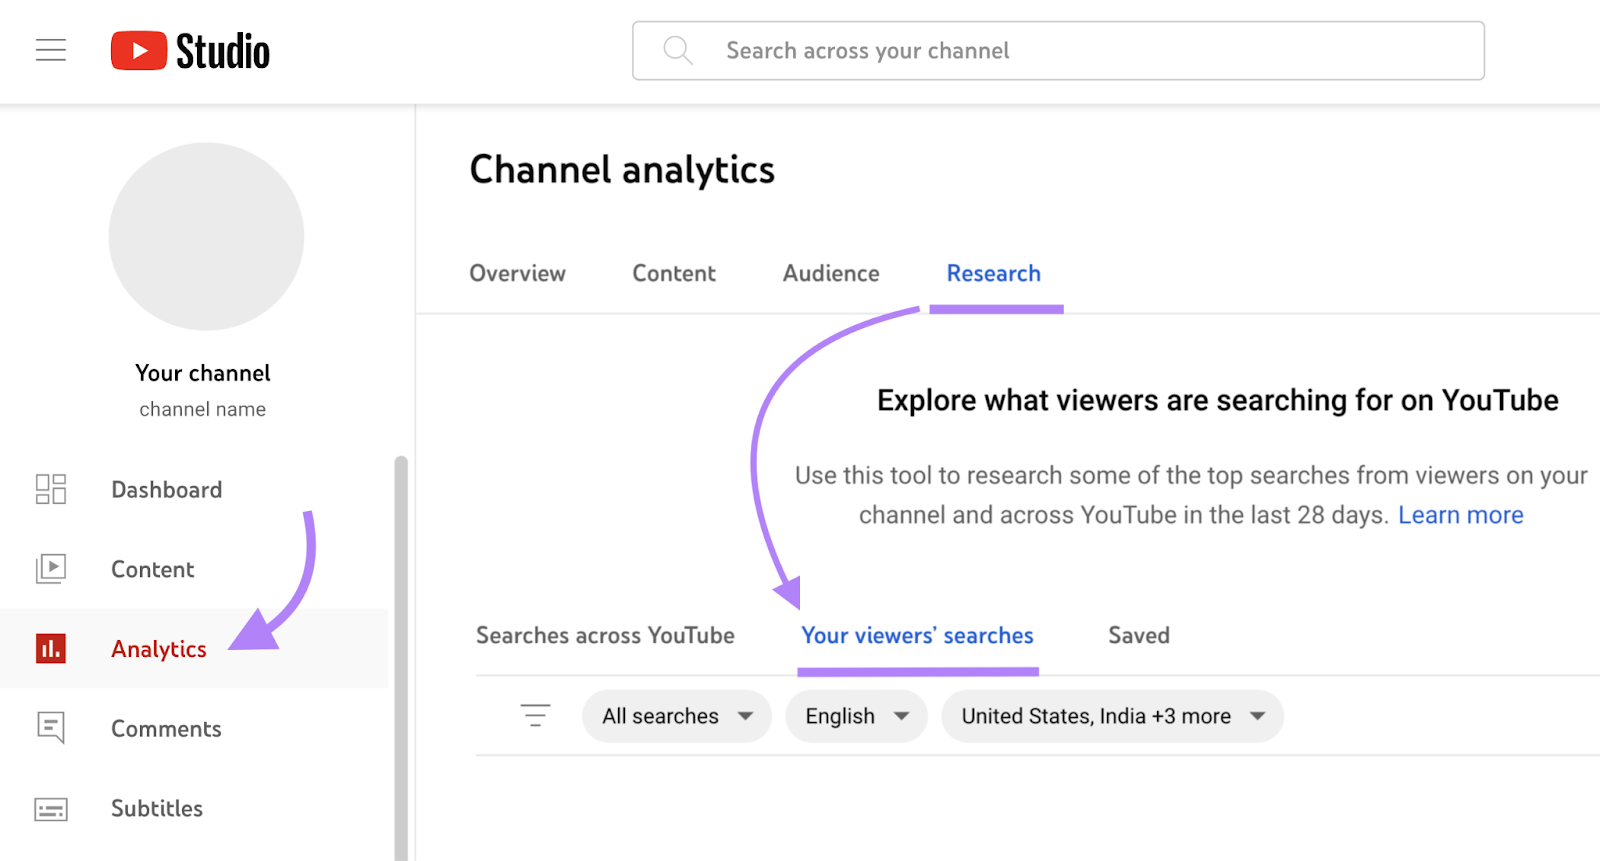 “Your viewers’ searches” tab under "Research" on YouTube Analytics.